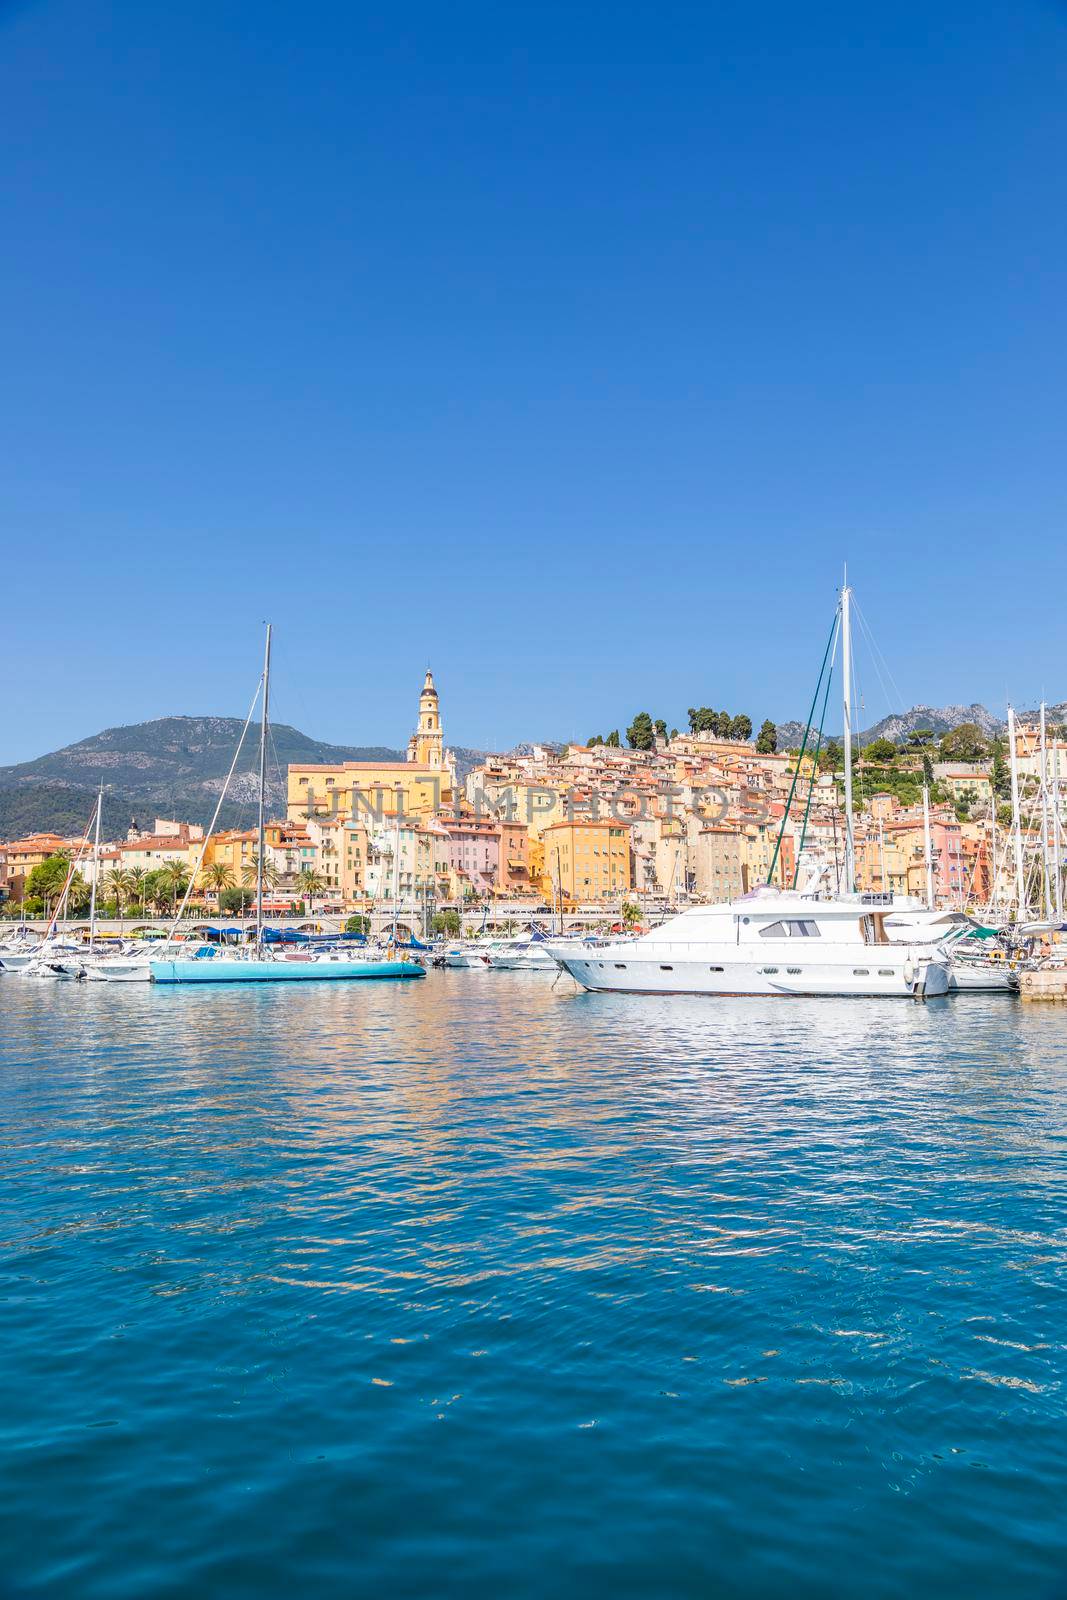 Menton, France - circa August 2021: view of the French Riviera, named the Coast Azur, located in the South of France.